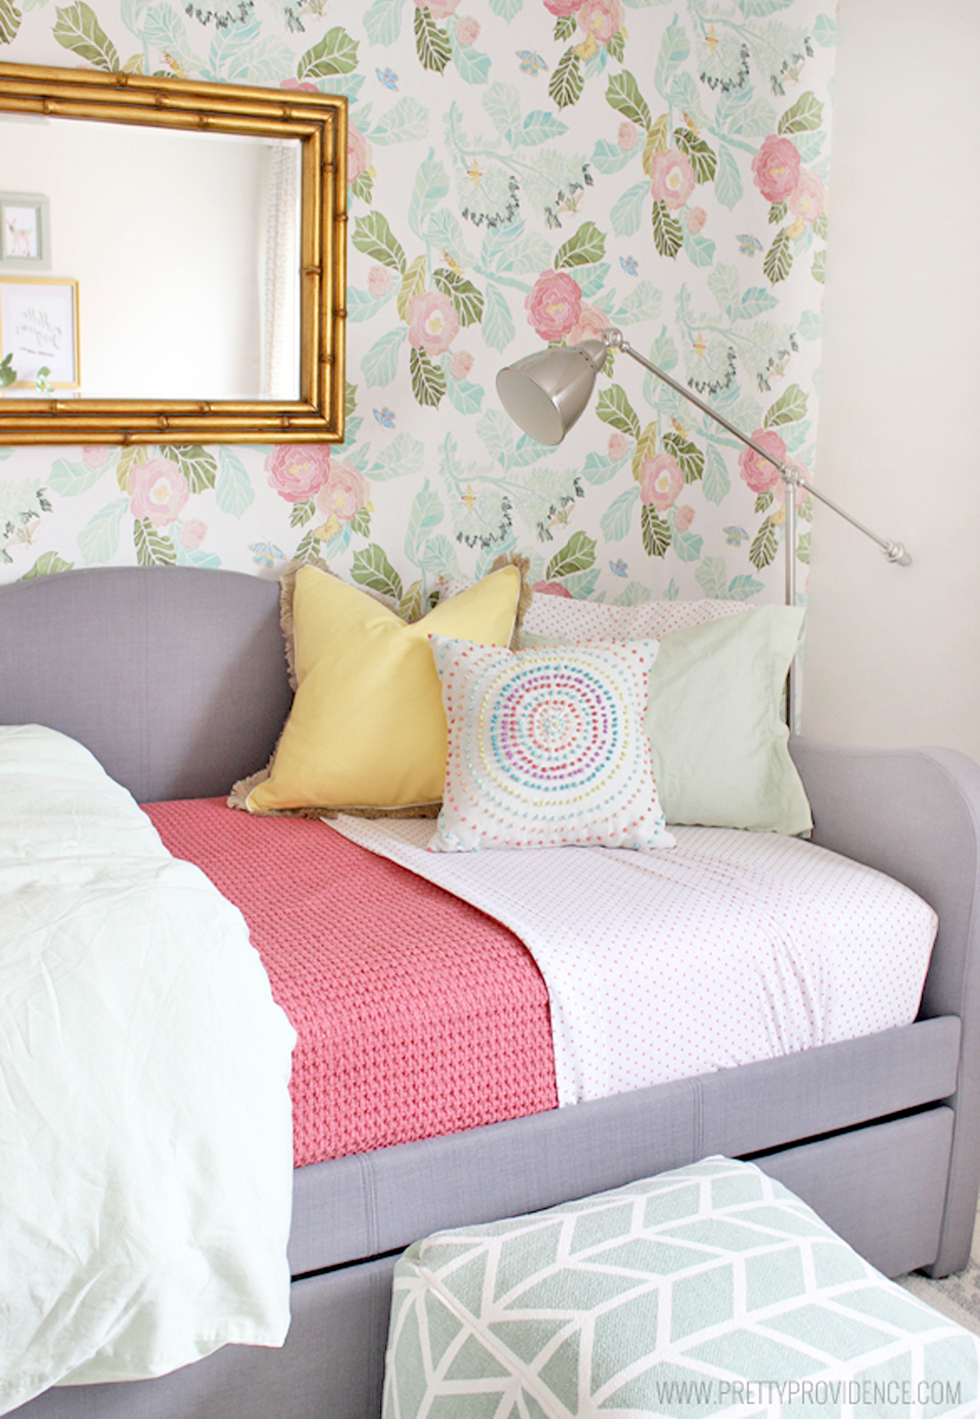 Day bed against pink and mint floral wallpaper